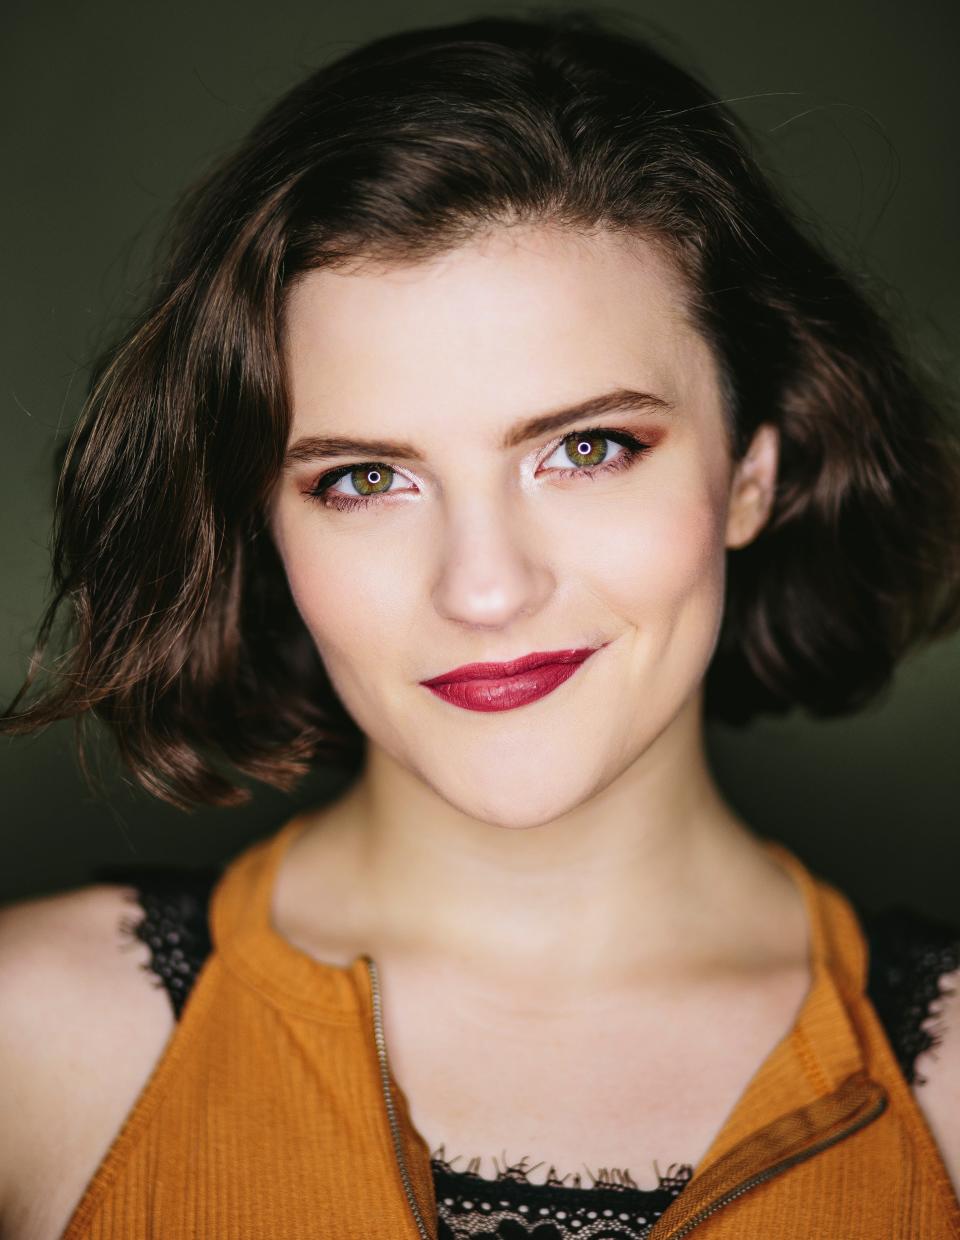 Em Hadick, a Holt High School graduate, will be on stage when "Pretty Woman" comes to the Wharton Center Dec. 13-18.